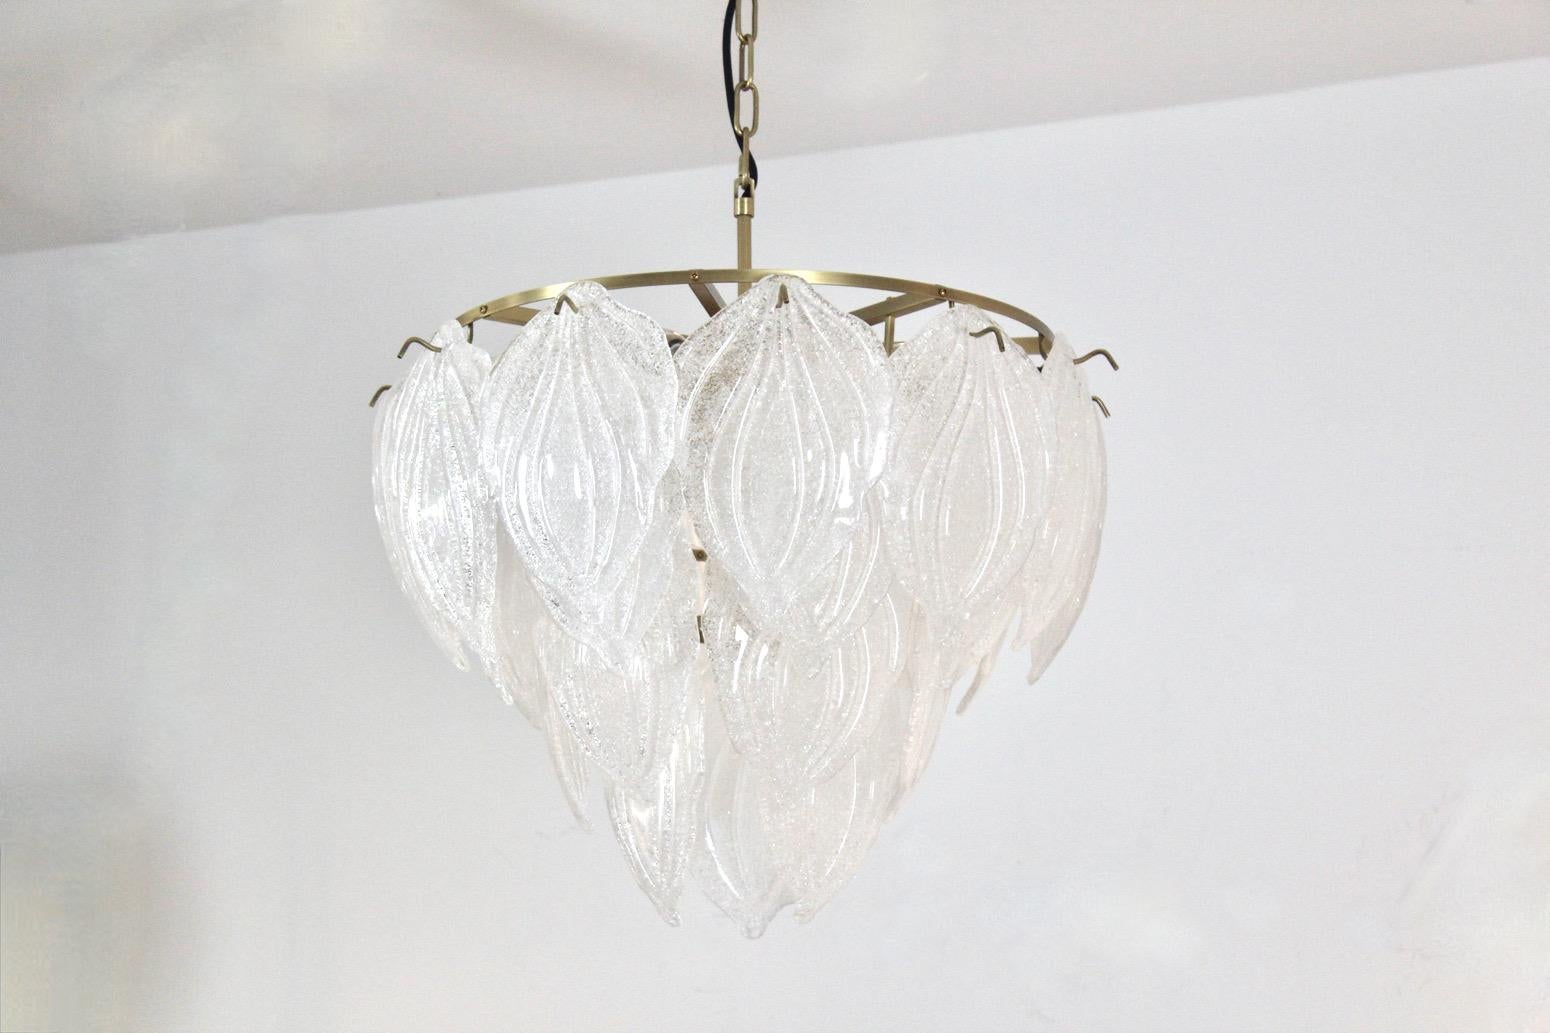 Wonderful chandelier made in Germany with 28 beautiful characteristic Frosted Glass Leaves on a Brass steel base with 9 lights. Very impressive large glass Chandelier and beautiful light effect when lit. In excellent condition

I have two matching